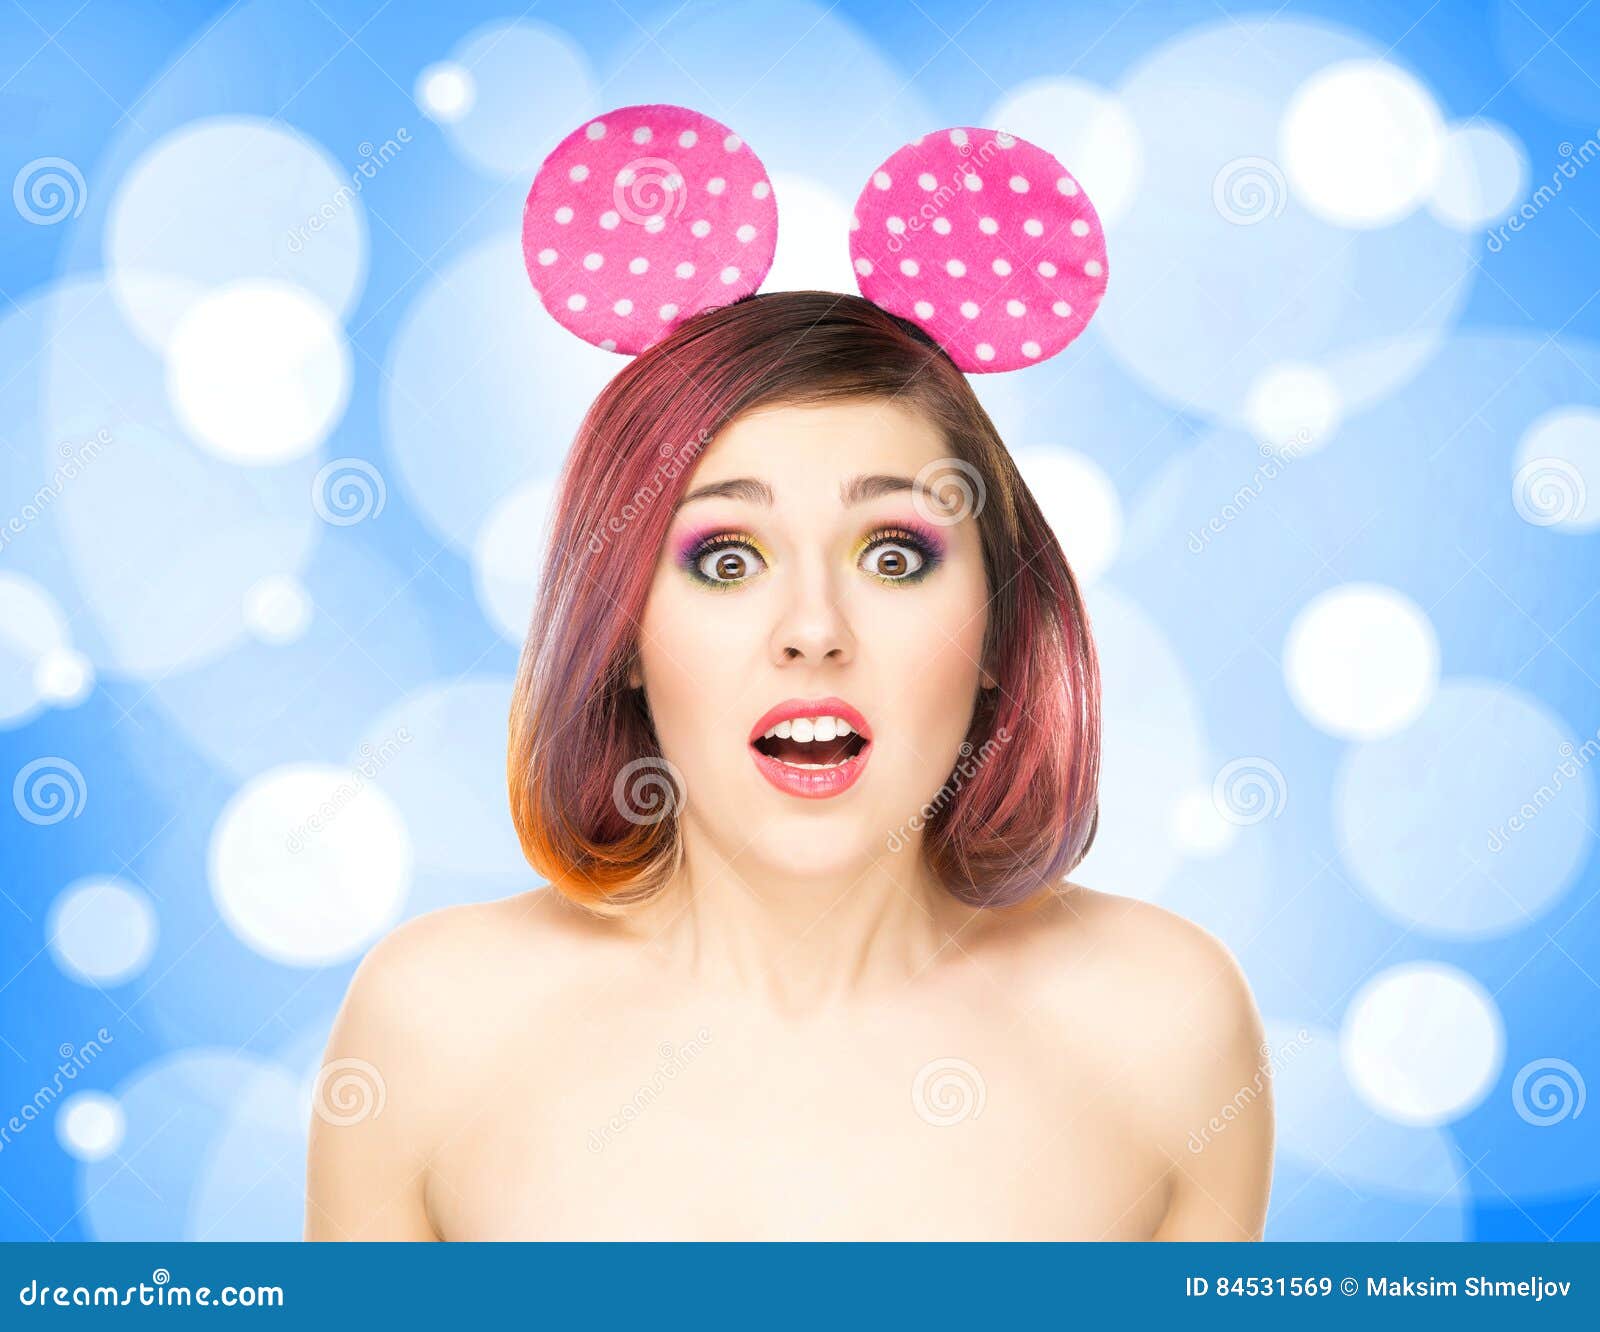 beautiful young smiling woman in mickey mouse ears